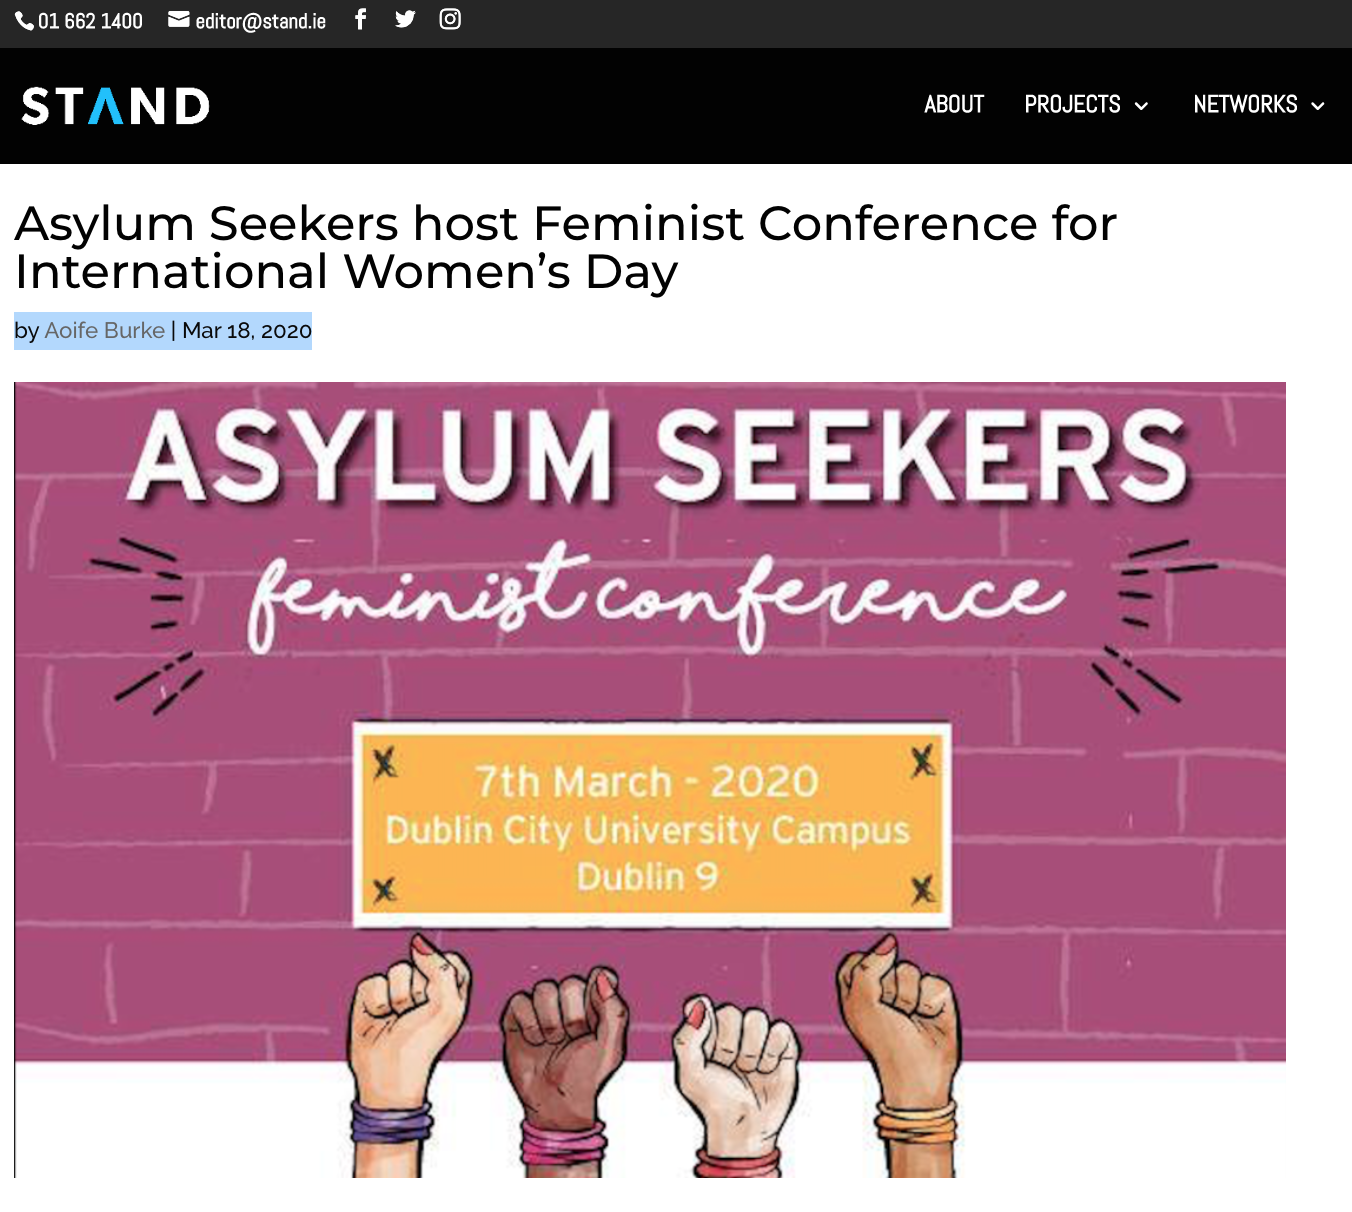 18:03:20-STAND-NicolaAnthony-AsylumSeekersFeministConference-p1.png